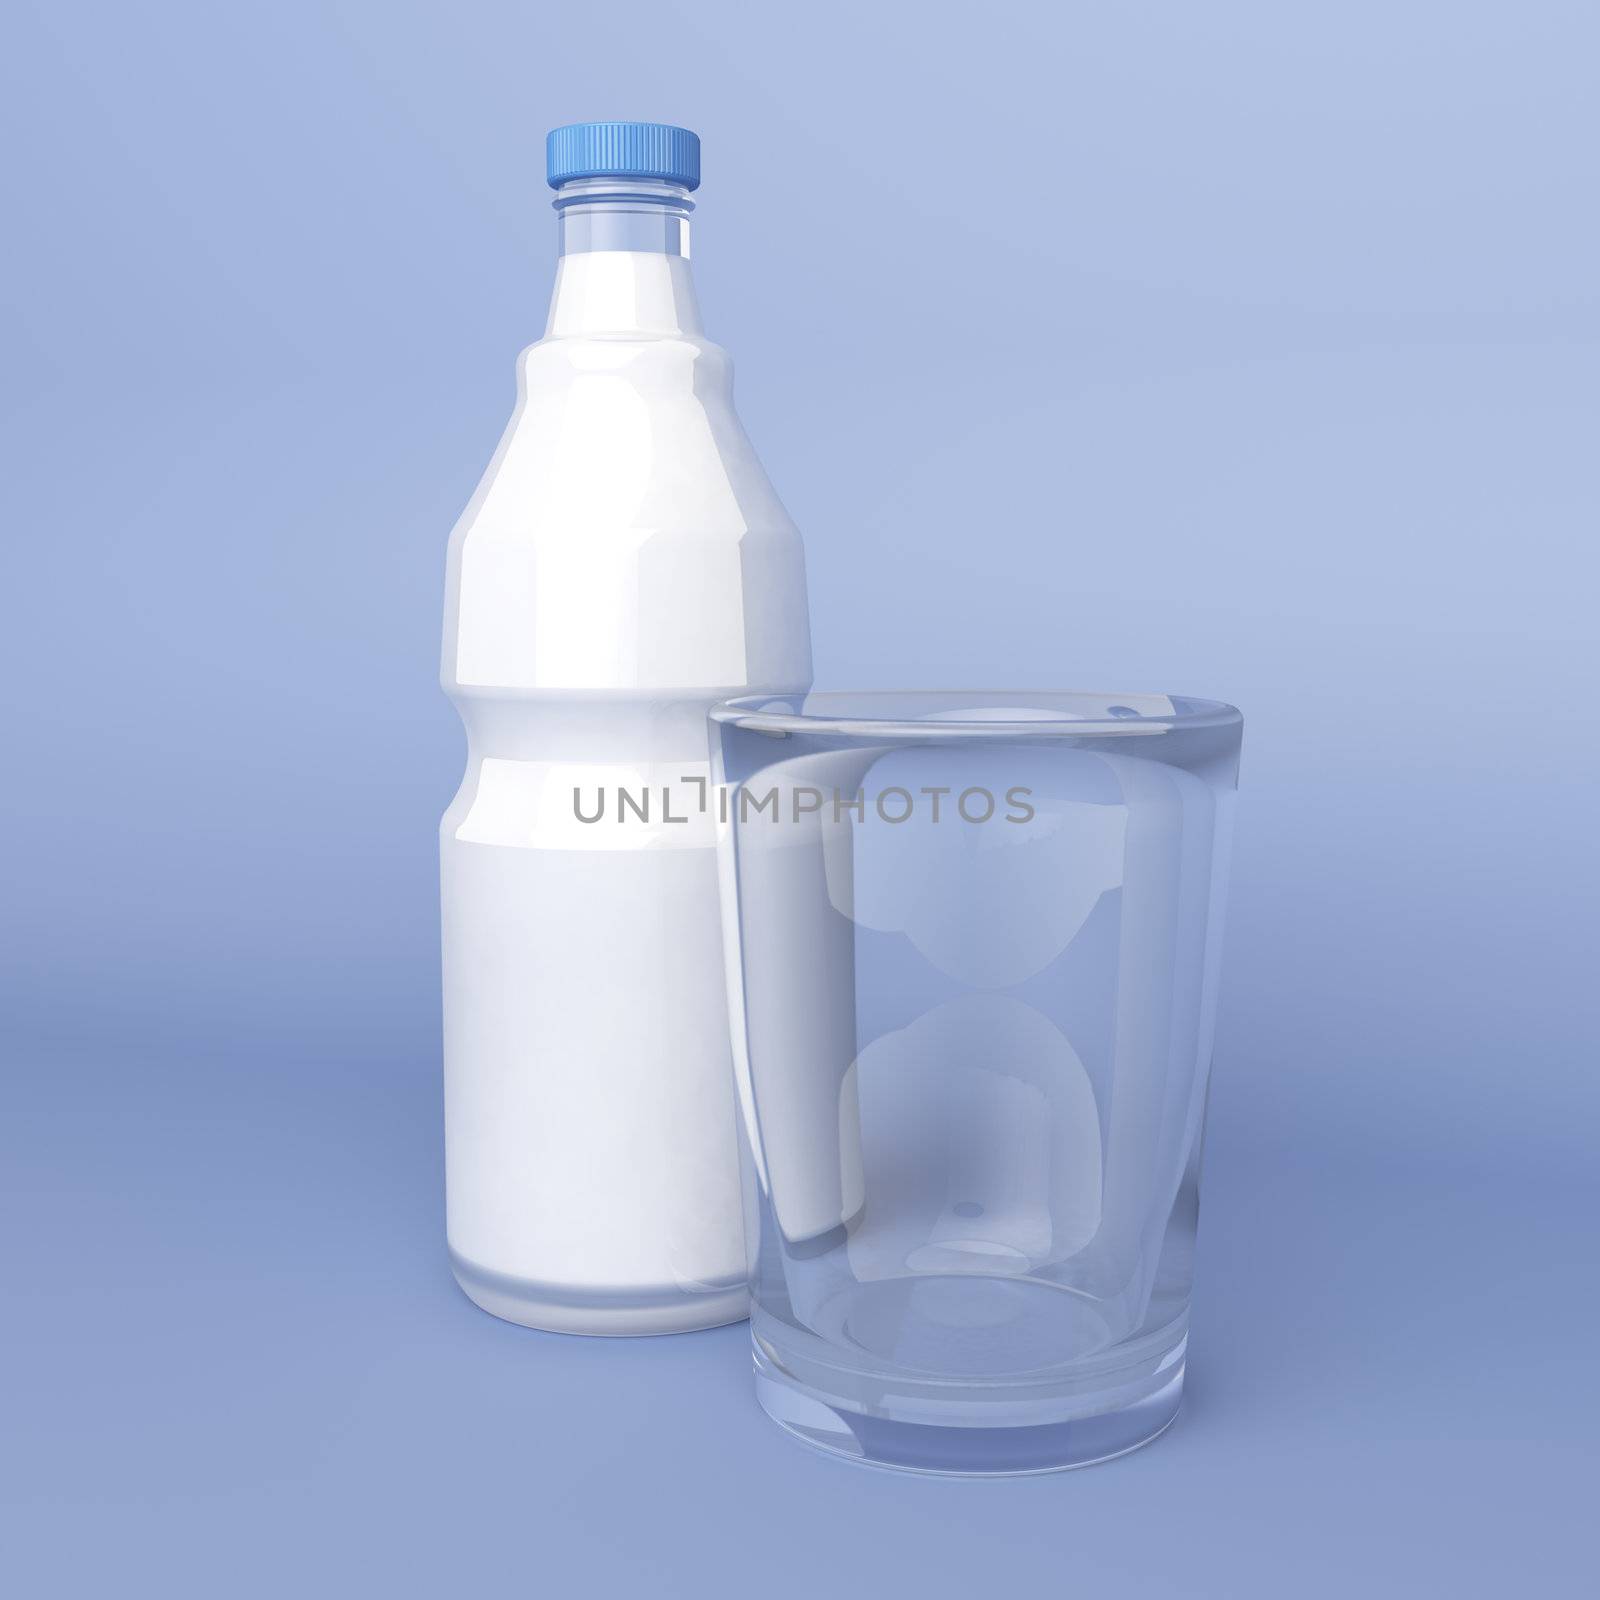 Milk in a glass bottle and empty glass on blue background